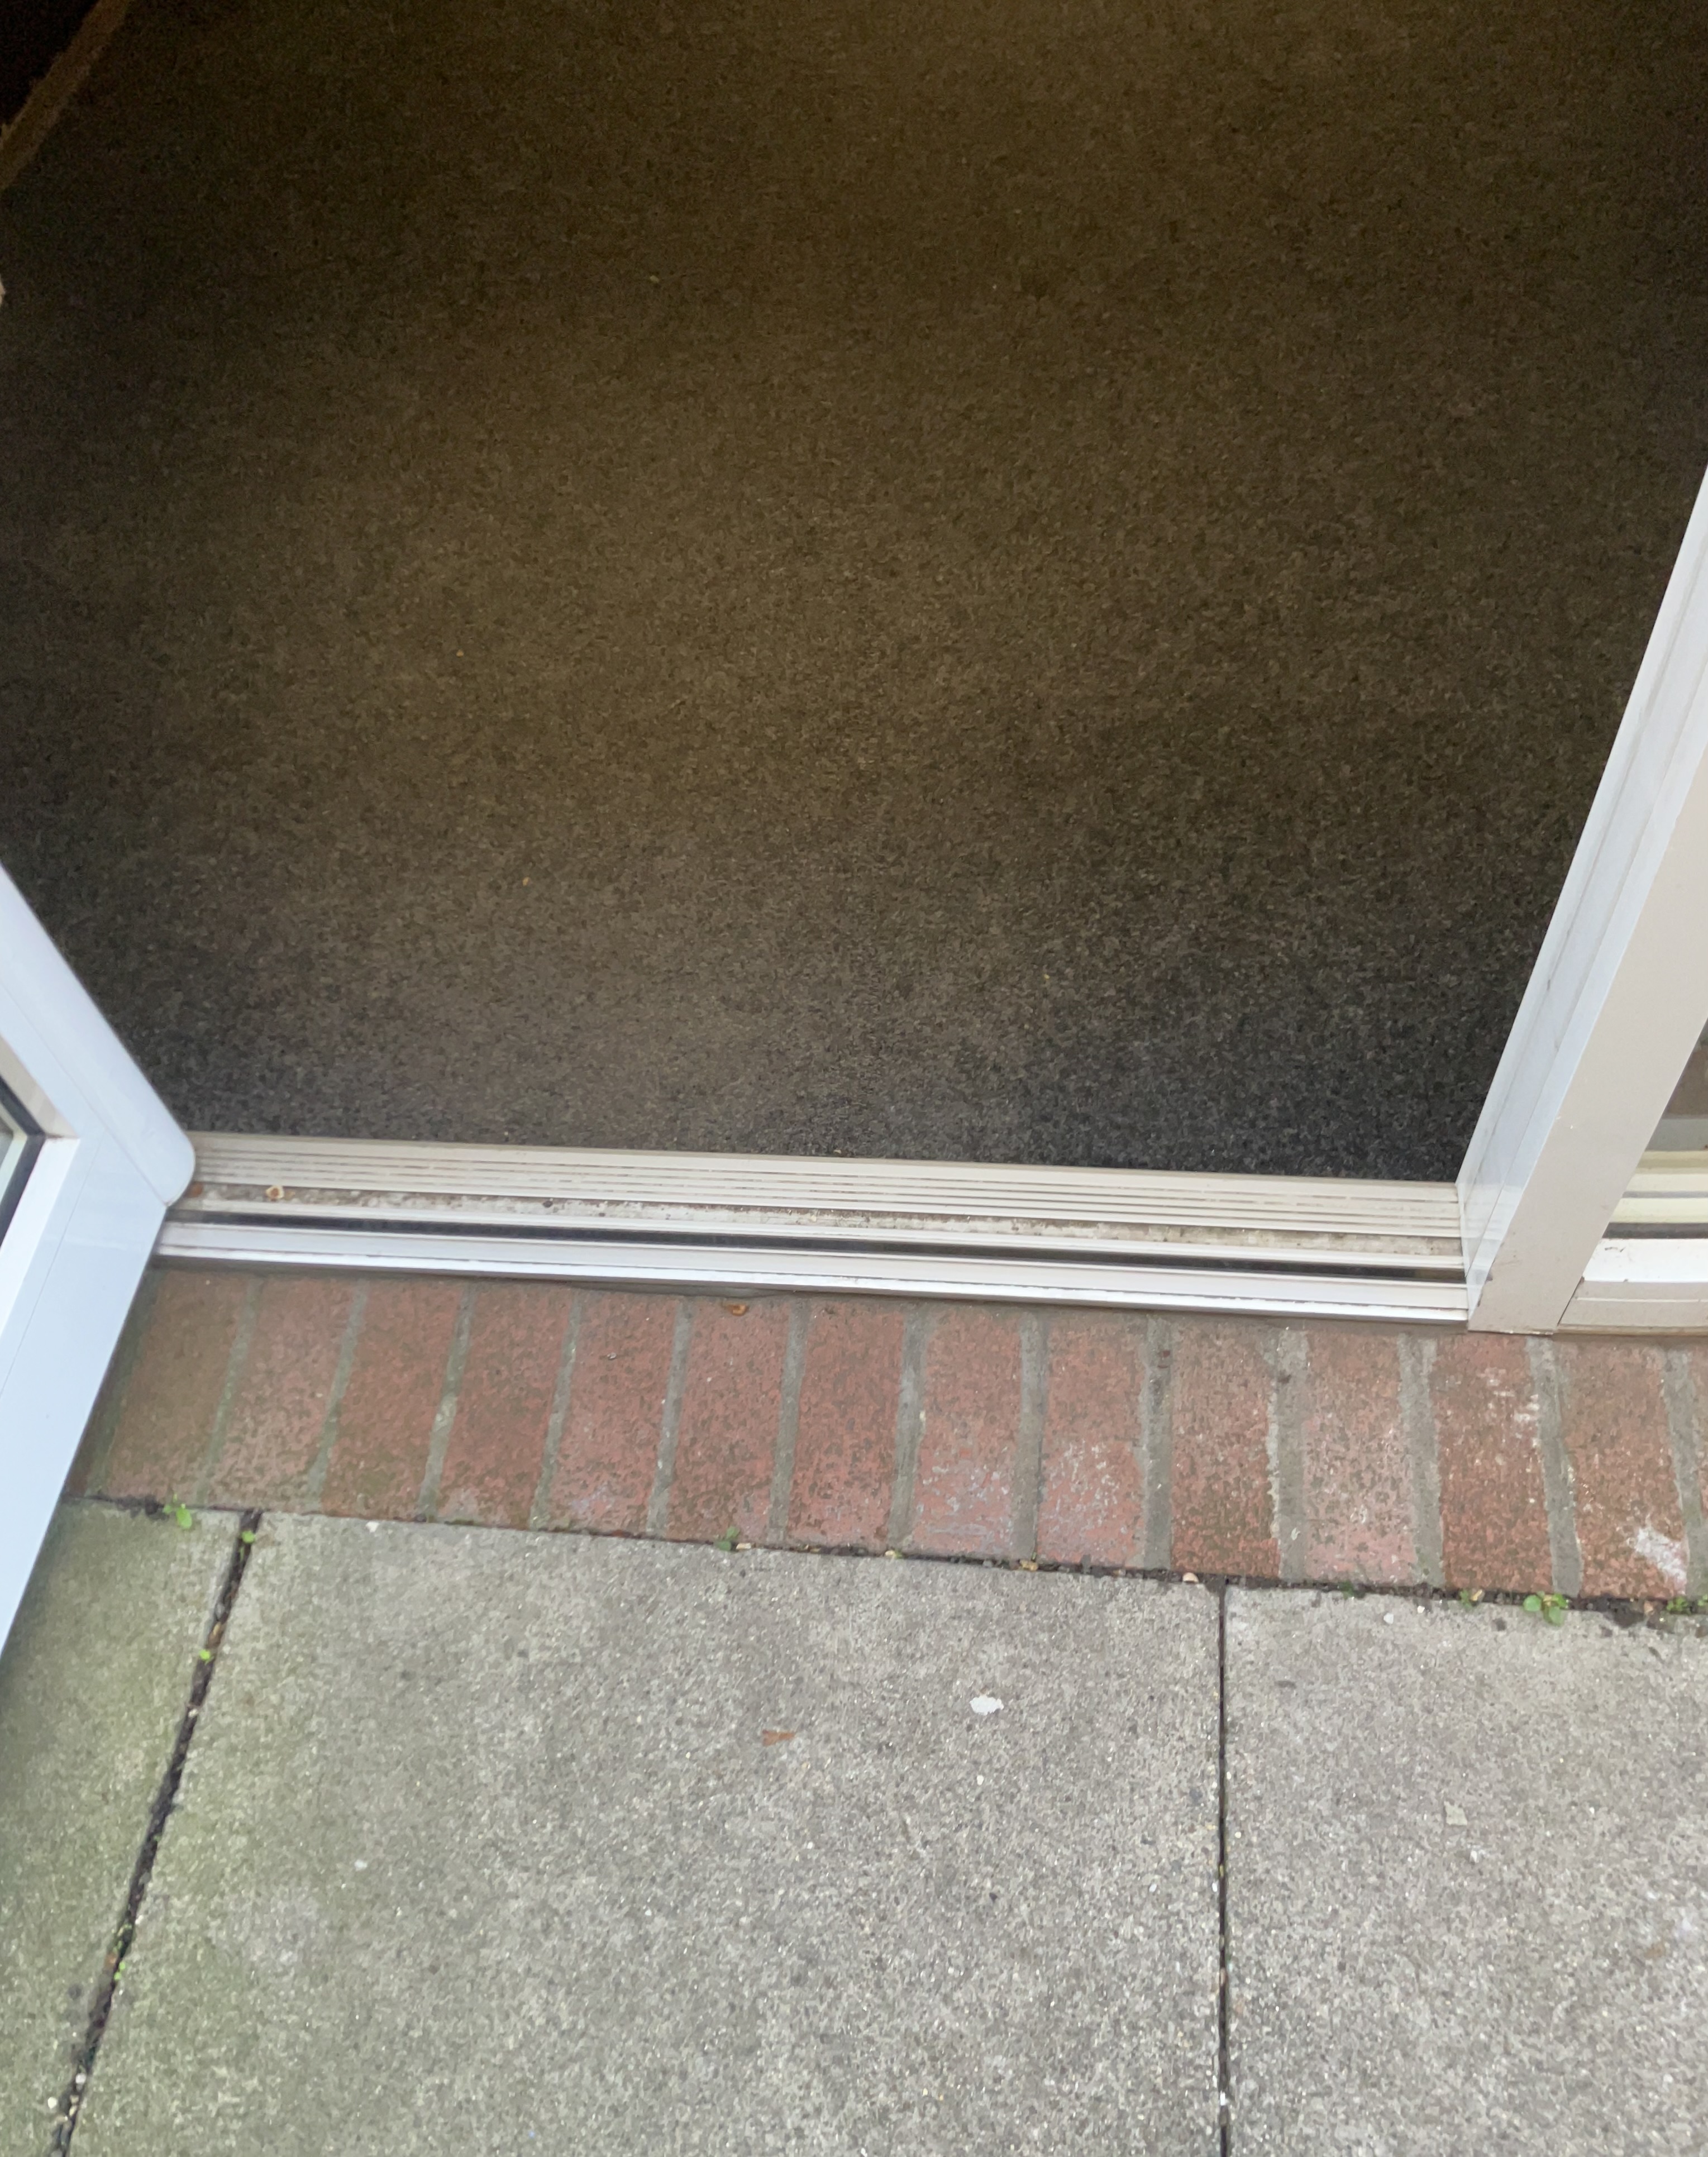 There is a small lip at the foot of the front door.